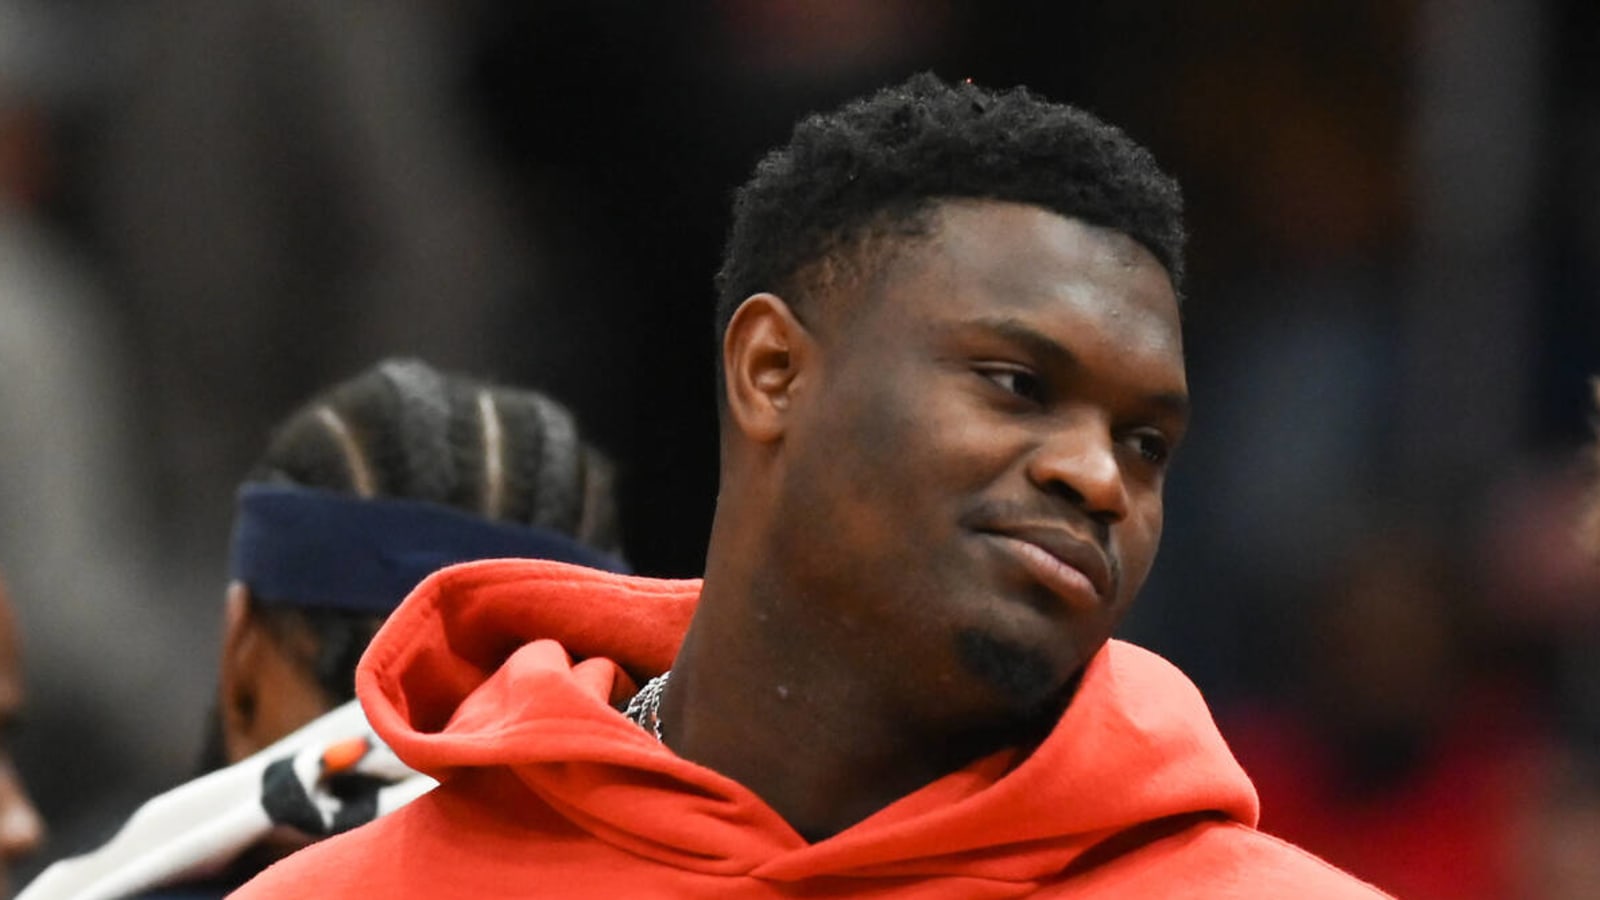 Pelicans star Zion Williamson shows off new look